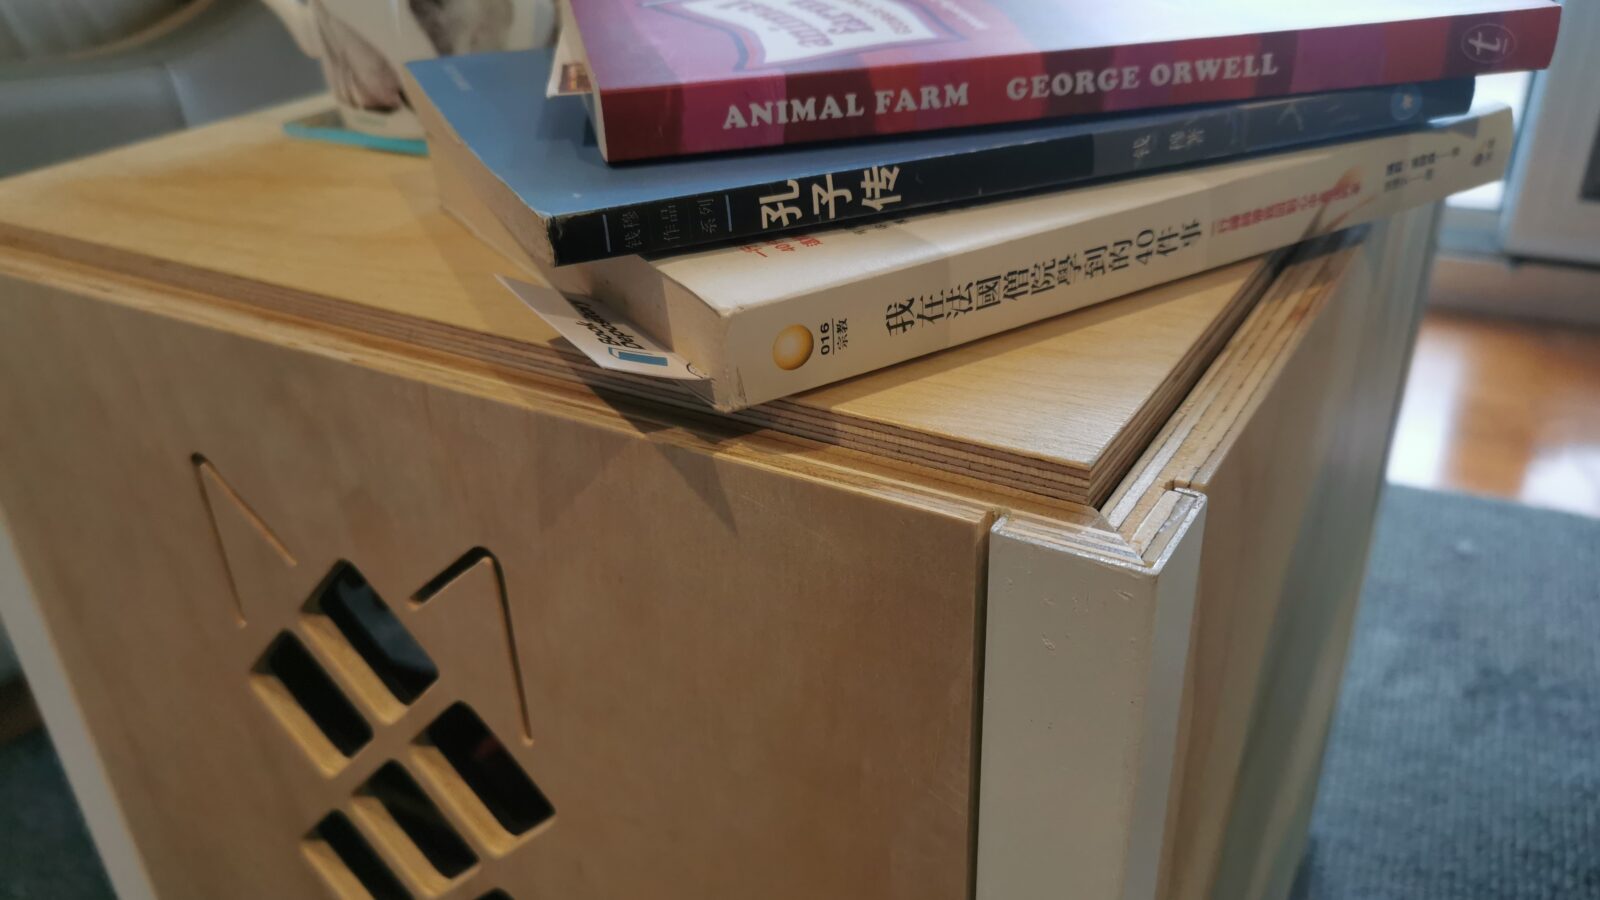 Close up of the Cubicat with books stacked on top.